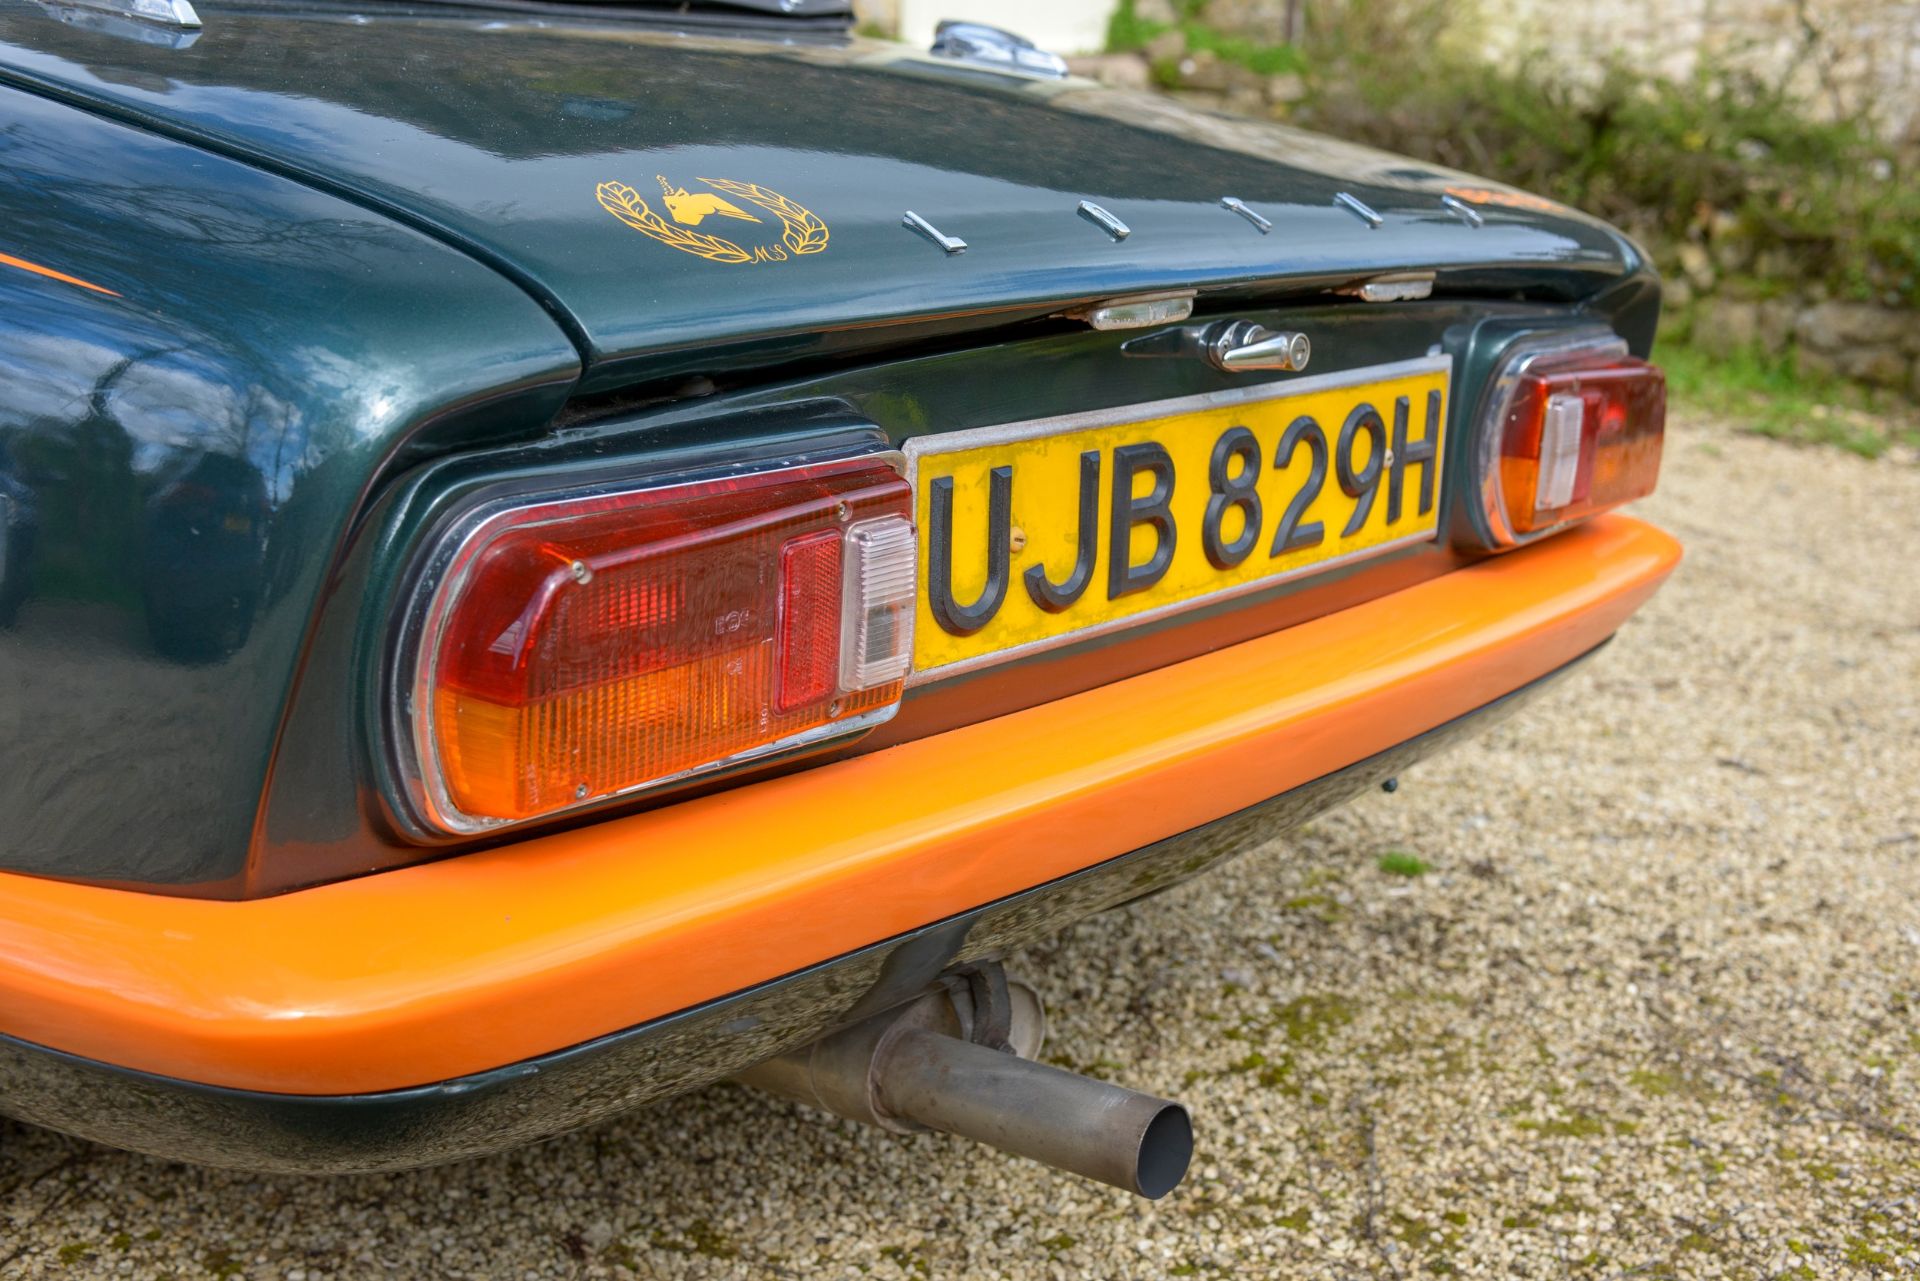 1969 LOTUS ELAN SERIES 4 BRM DROPHEAD COUPE Chassis Number: 45/9498 Registration Number: UJB 829H - Image 11 of 33